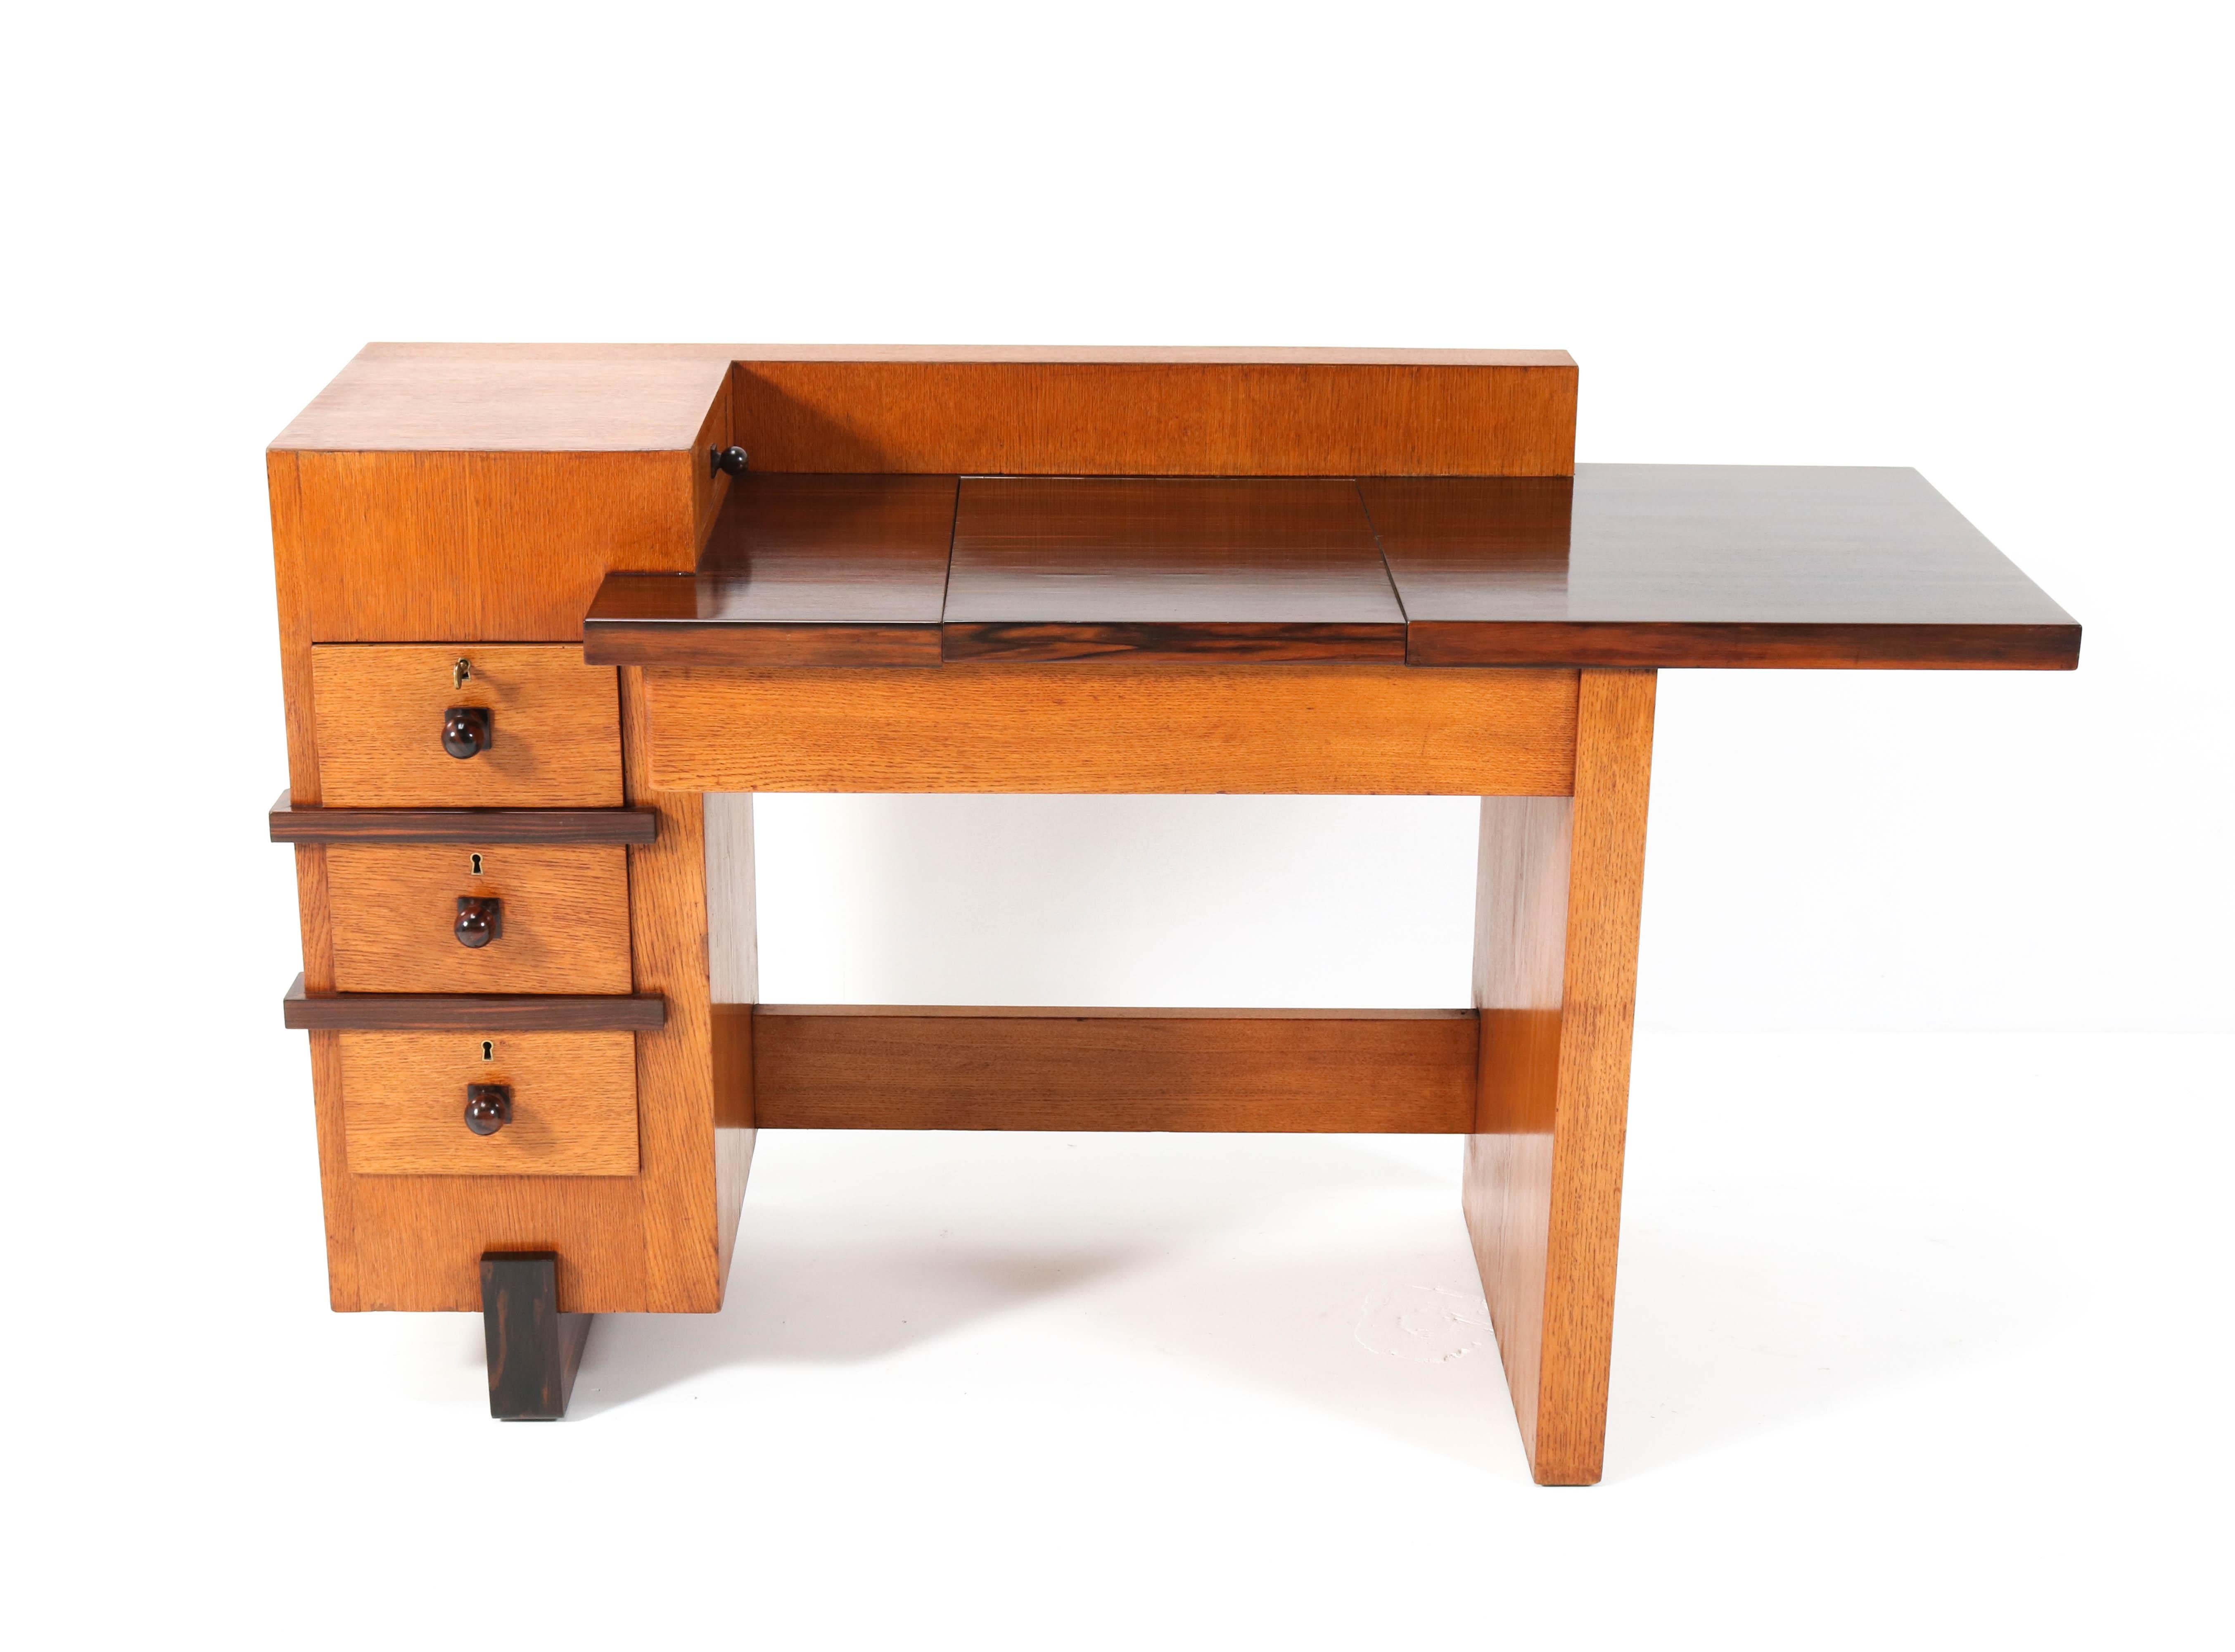 Magnificent and ultra rare Art Deco Modernist writing table. Design by Hendrik Wouda for H. Pander & Zonen Den Haag. Striking Dutch design from 1924.Solid oak and original oak veneered base with original solid macassar ebony knobs. The writing